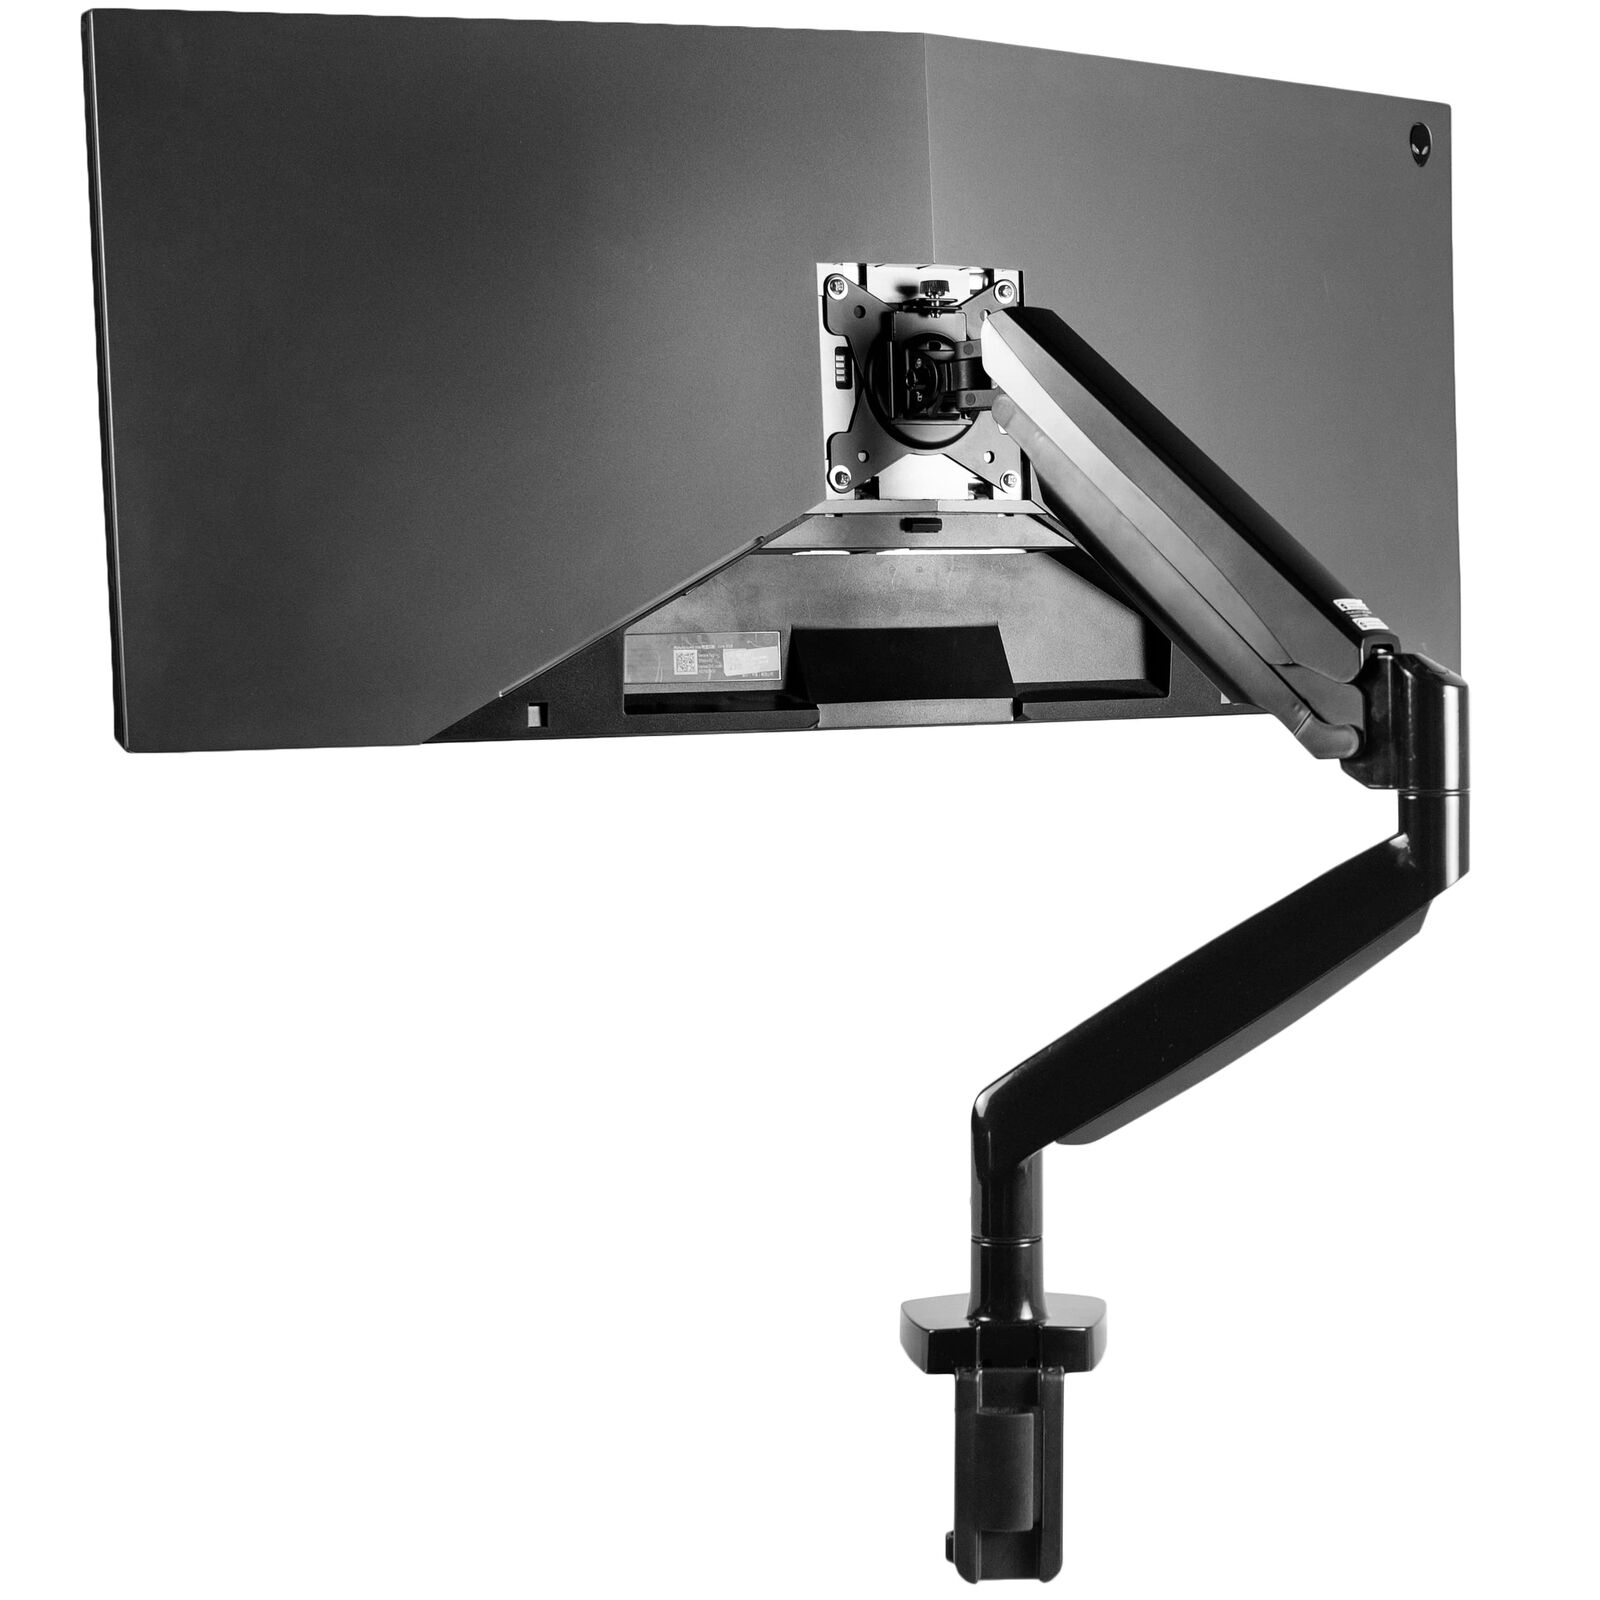 Premium Aluminum Heavy Duty Single Monitor Arm for Ultrawide Monitor up to 35...